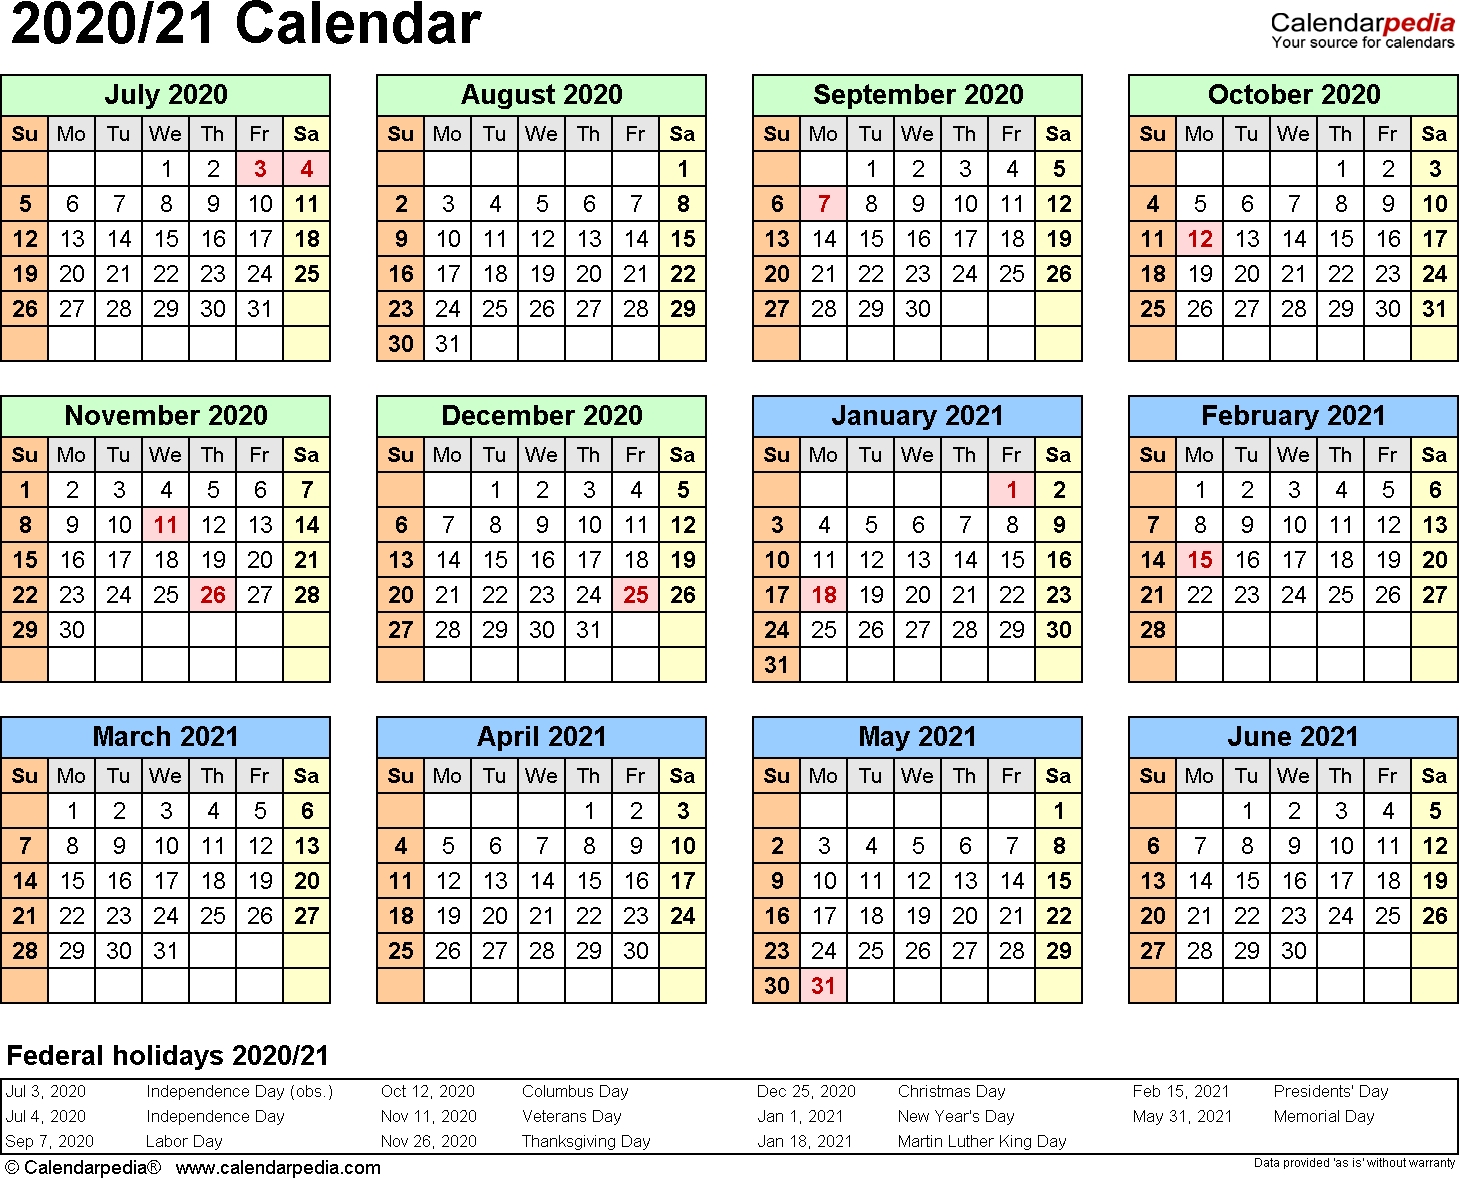 Split Year Calendars 2020/2021 (July To June) - Word Templates